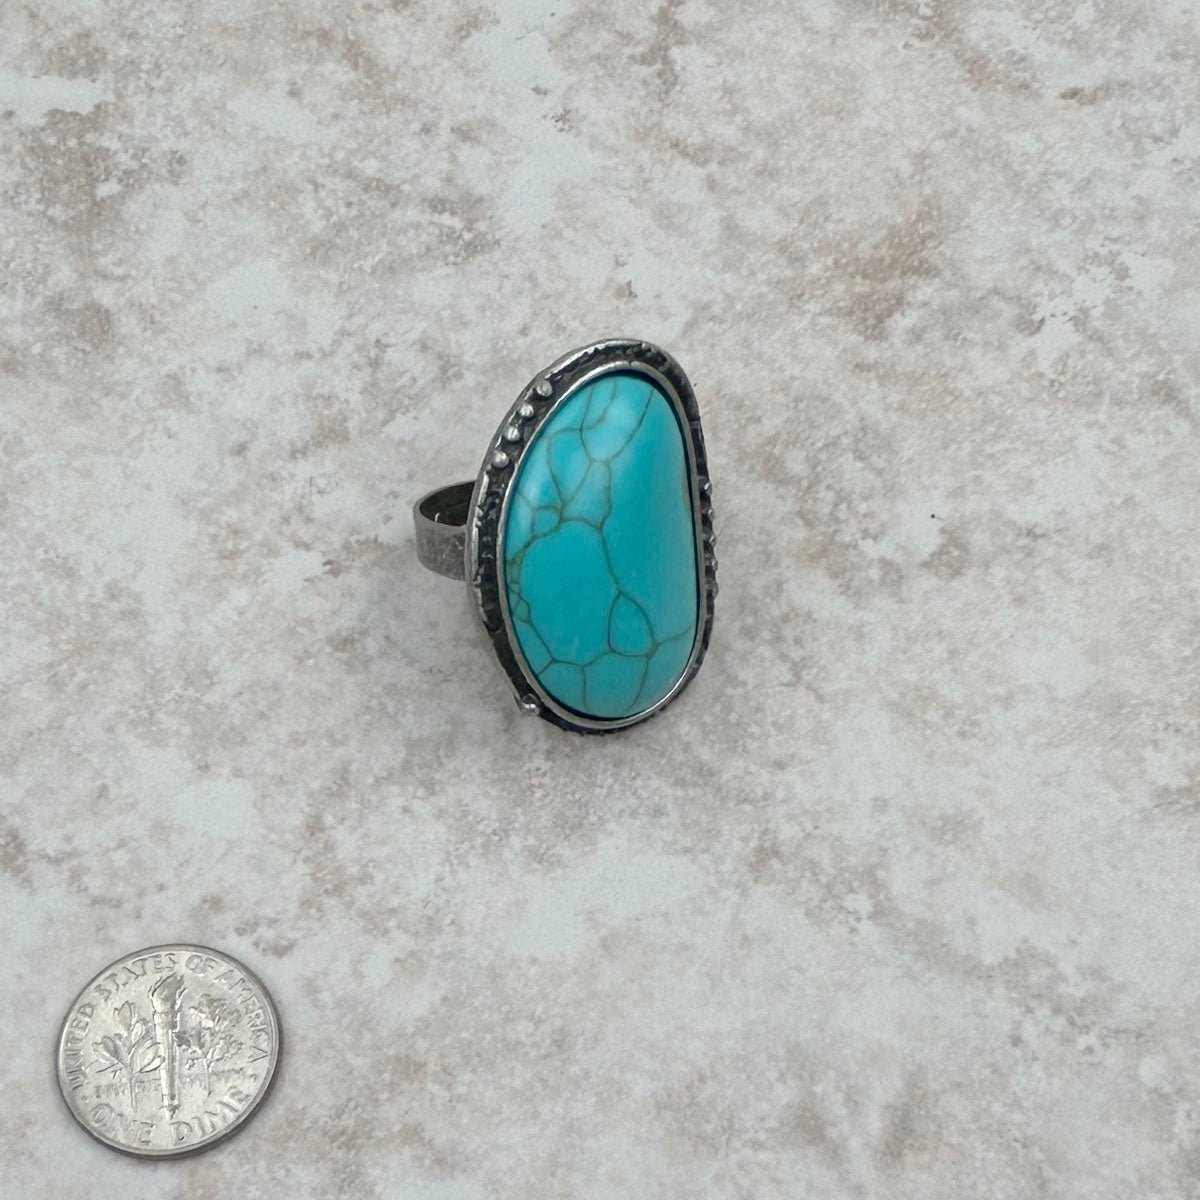 RGS230701-01-BLUE     Silver with turquoise stone oval adjustable Ring